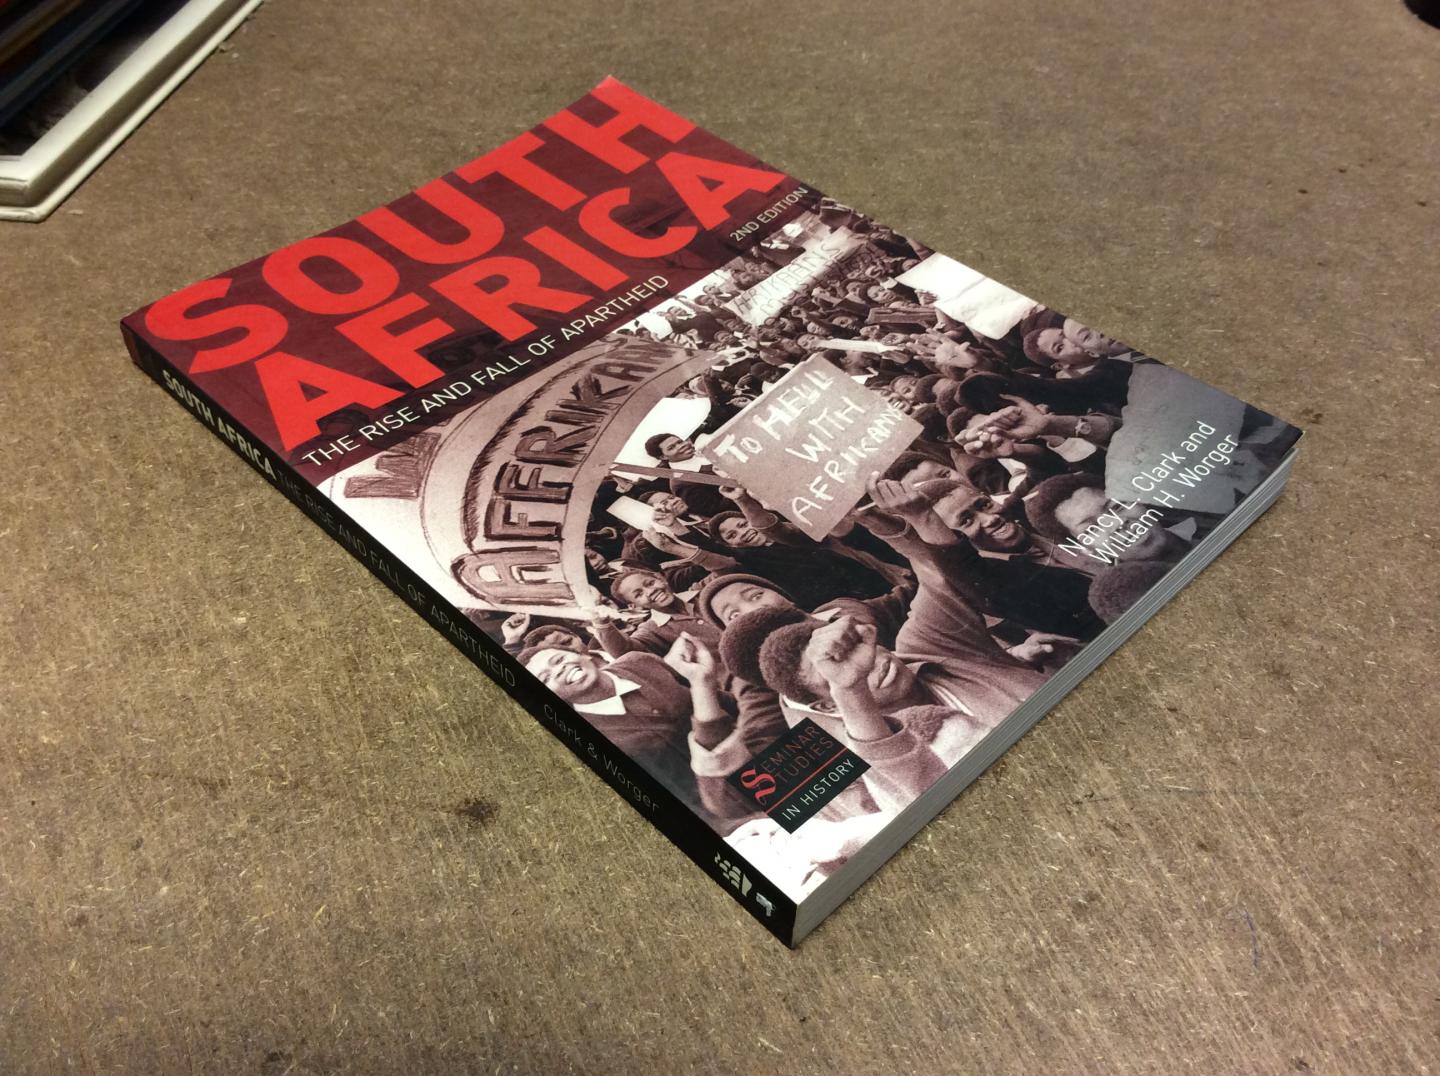 Clark, Nancy L. | Worger, William H. - South Africa. The Rise and Fall of Apartheid 2nd Edition